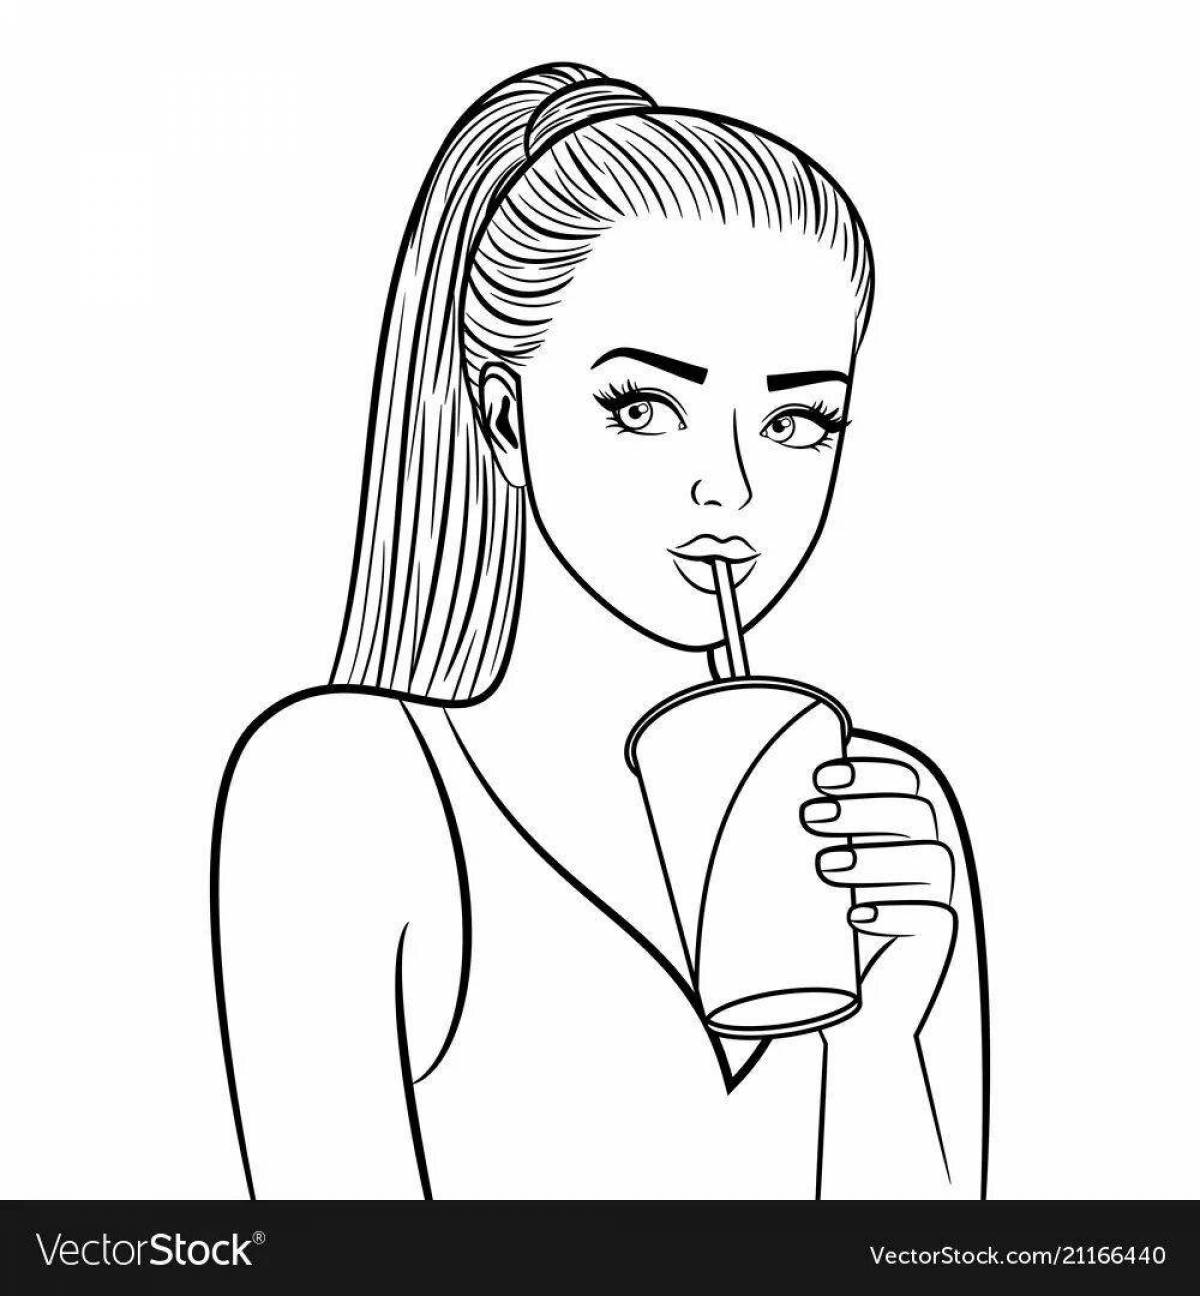 Coloring page of sparkling drink for girls